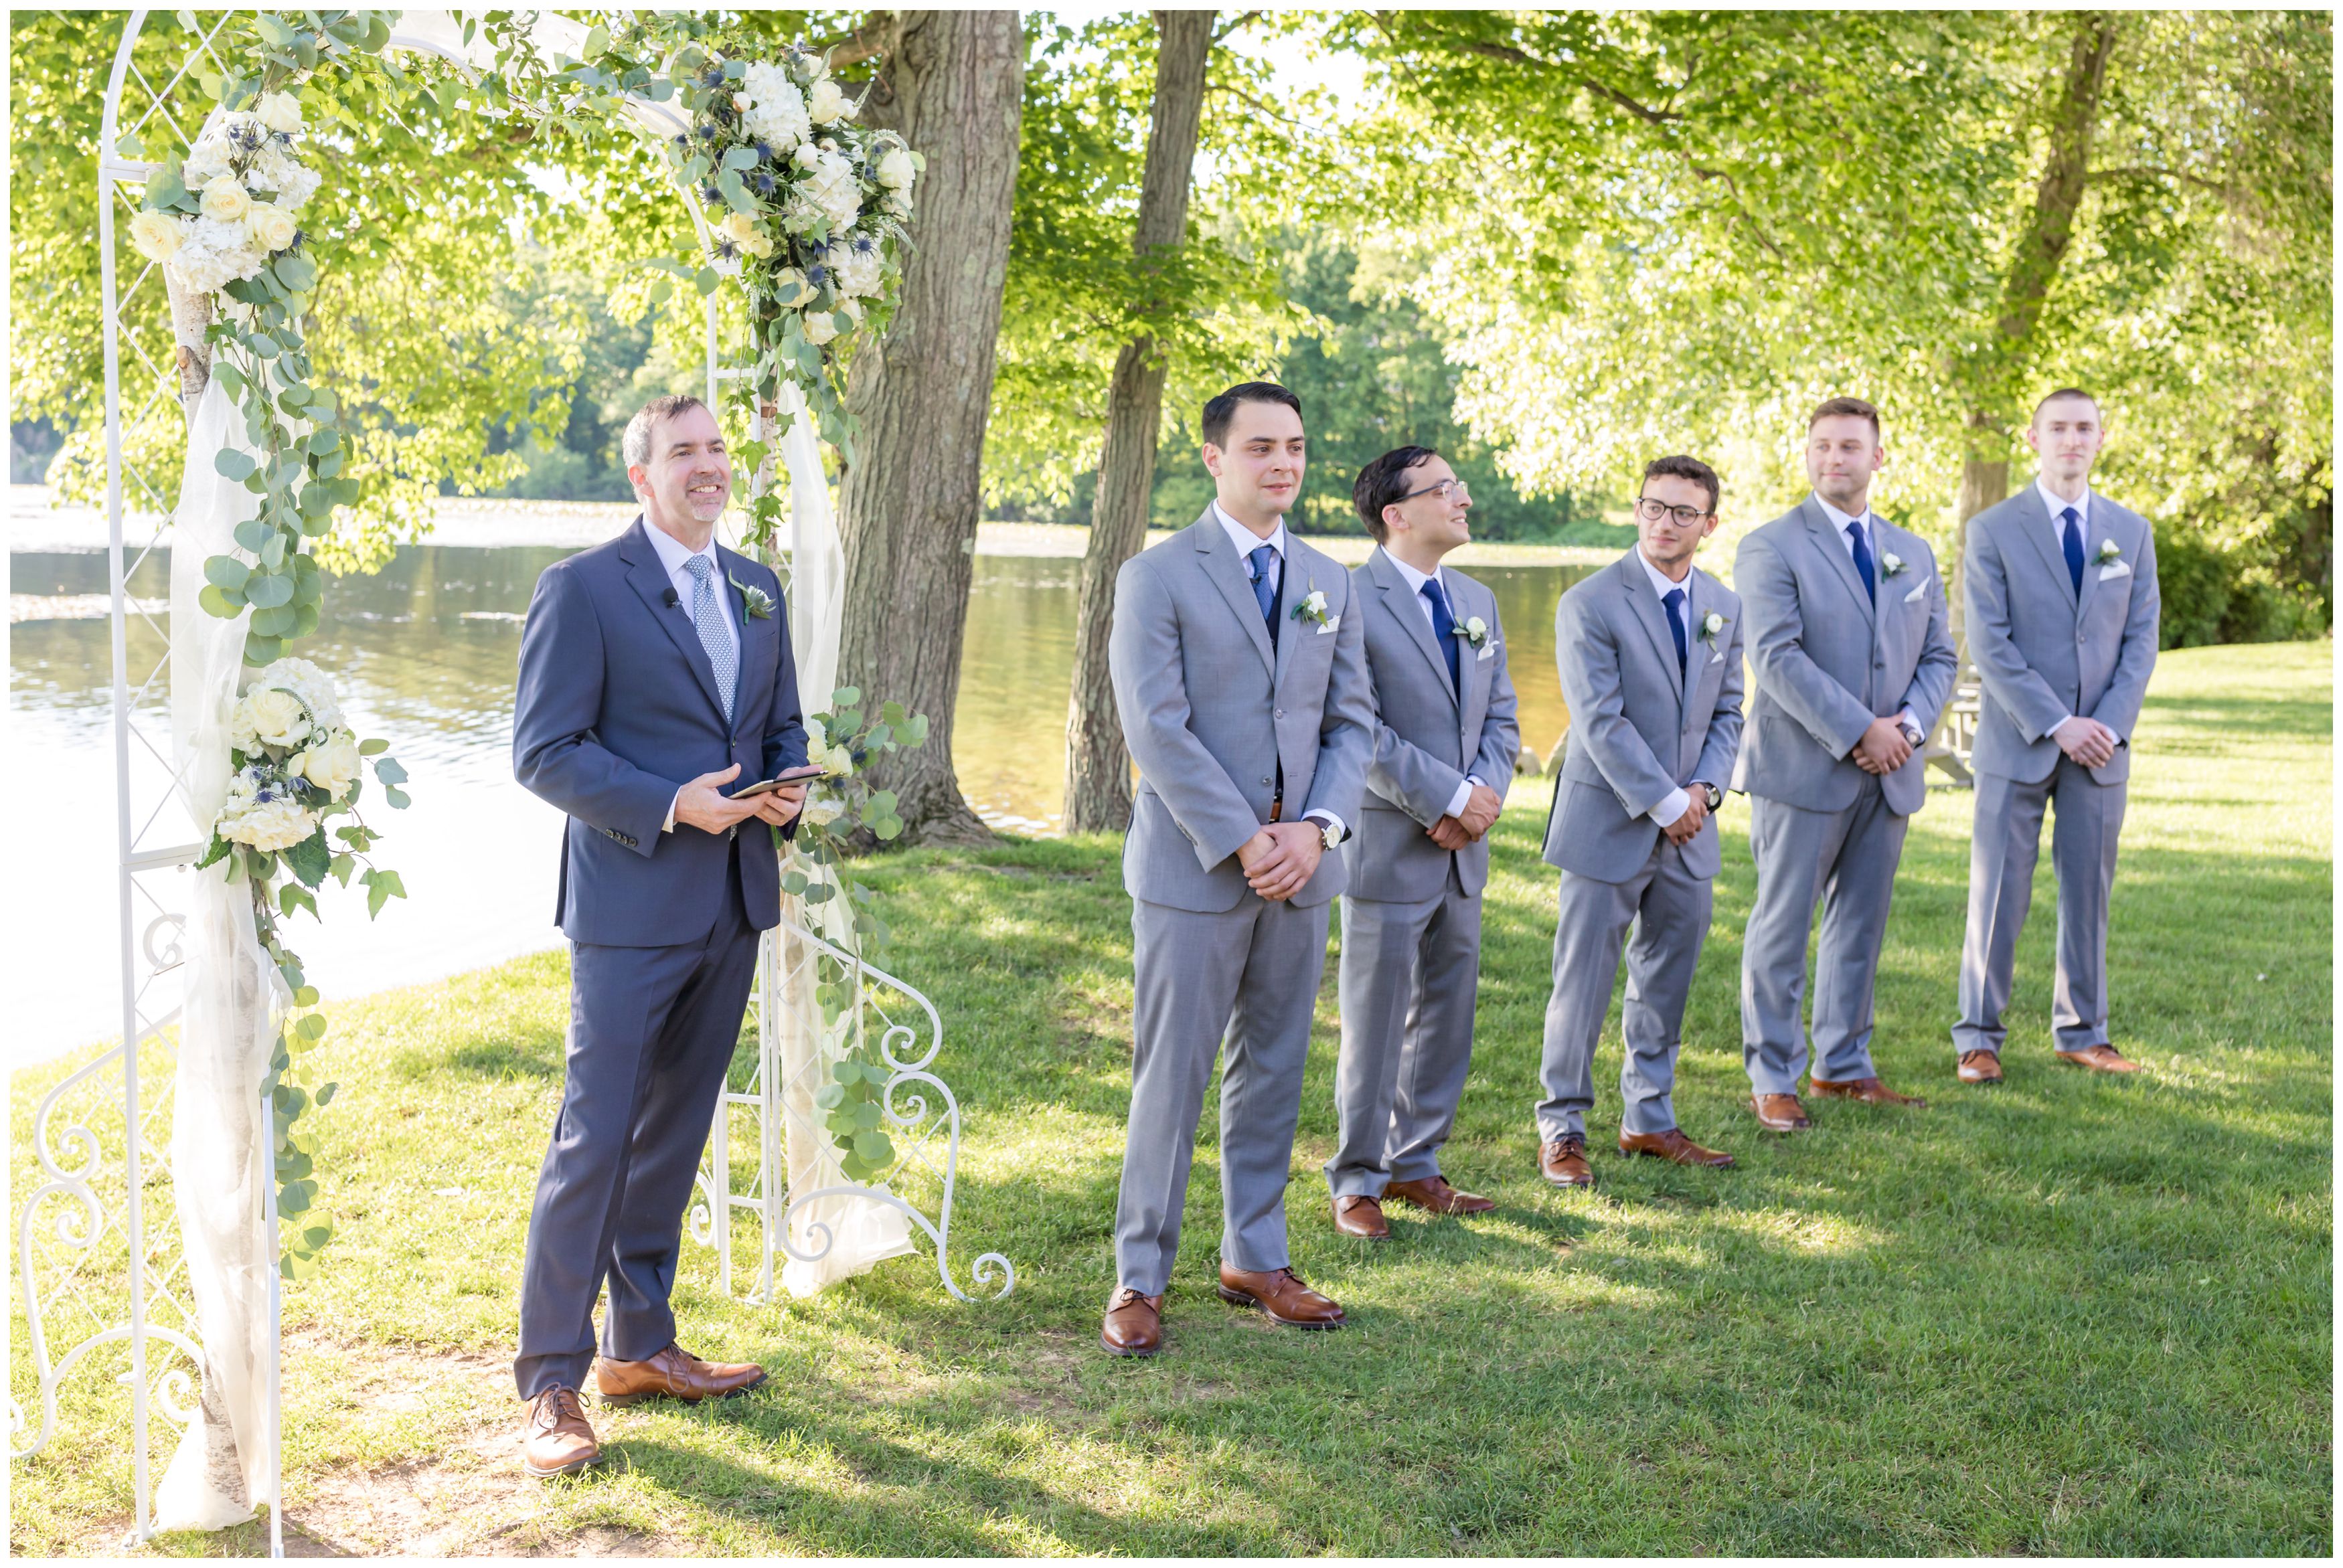 Officiant, groom and groomsmen at outdoor lakeside ceremony